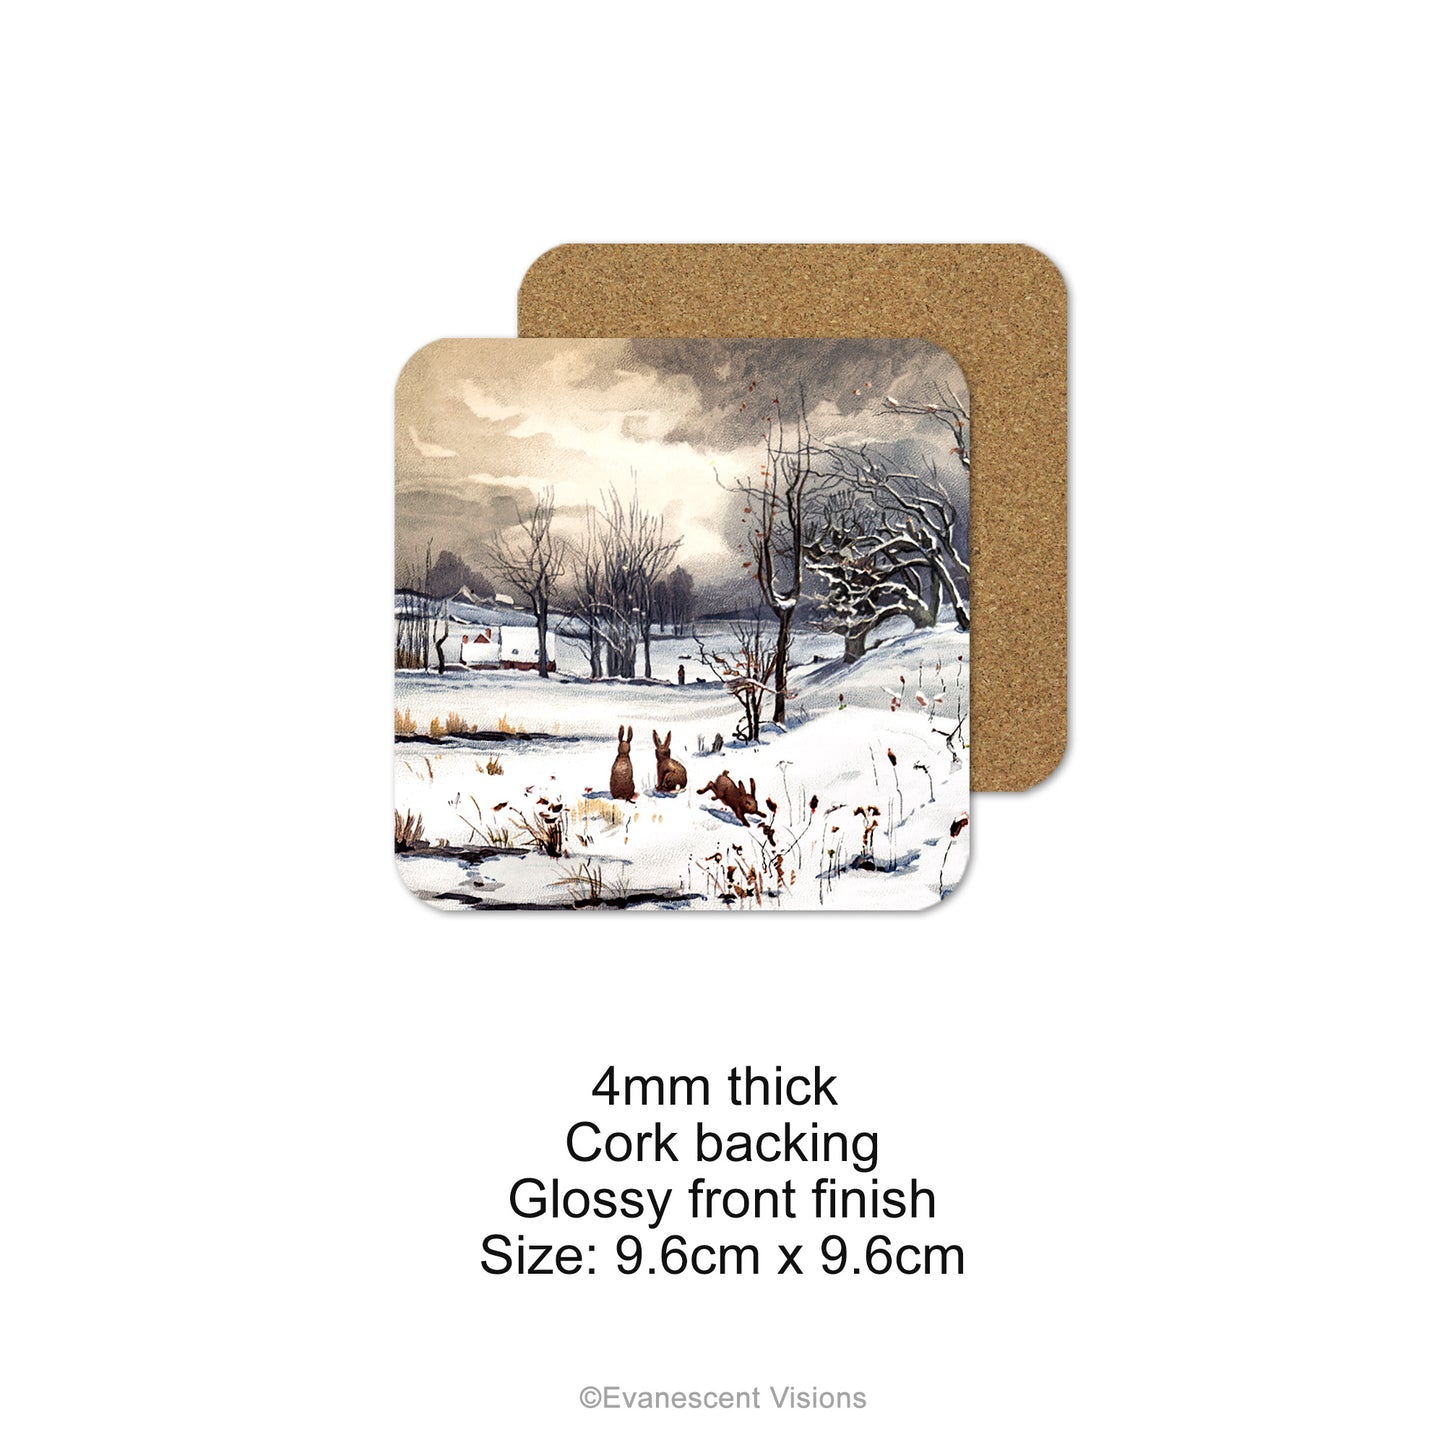 Single coaster with snowy winter scene and cork backing. Product details below coaster.